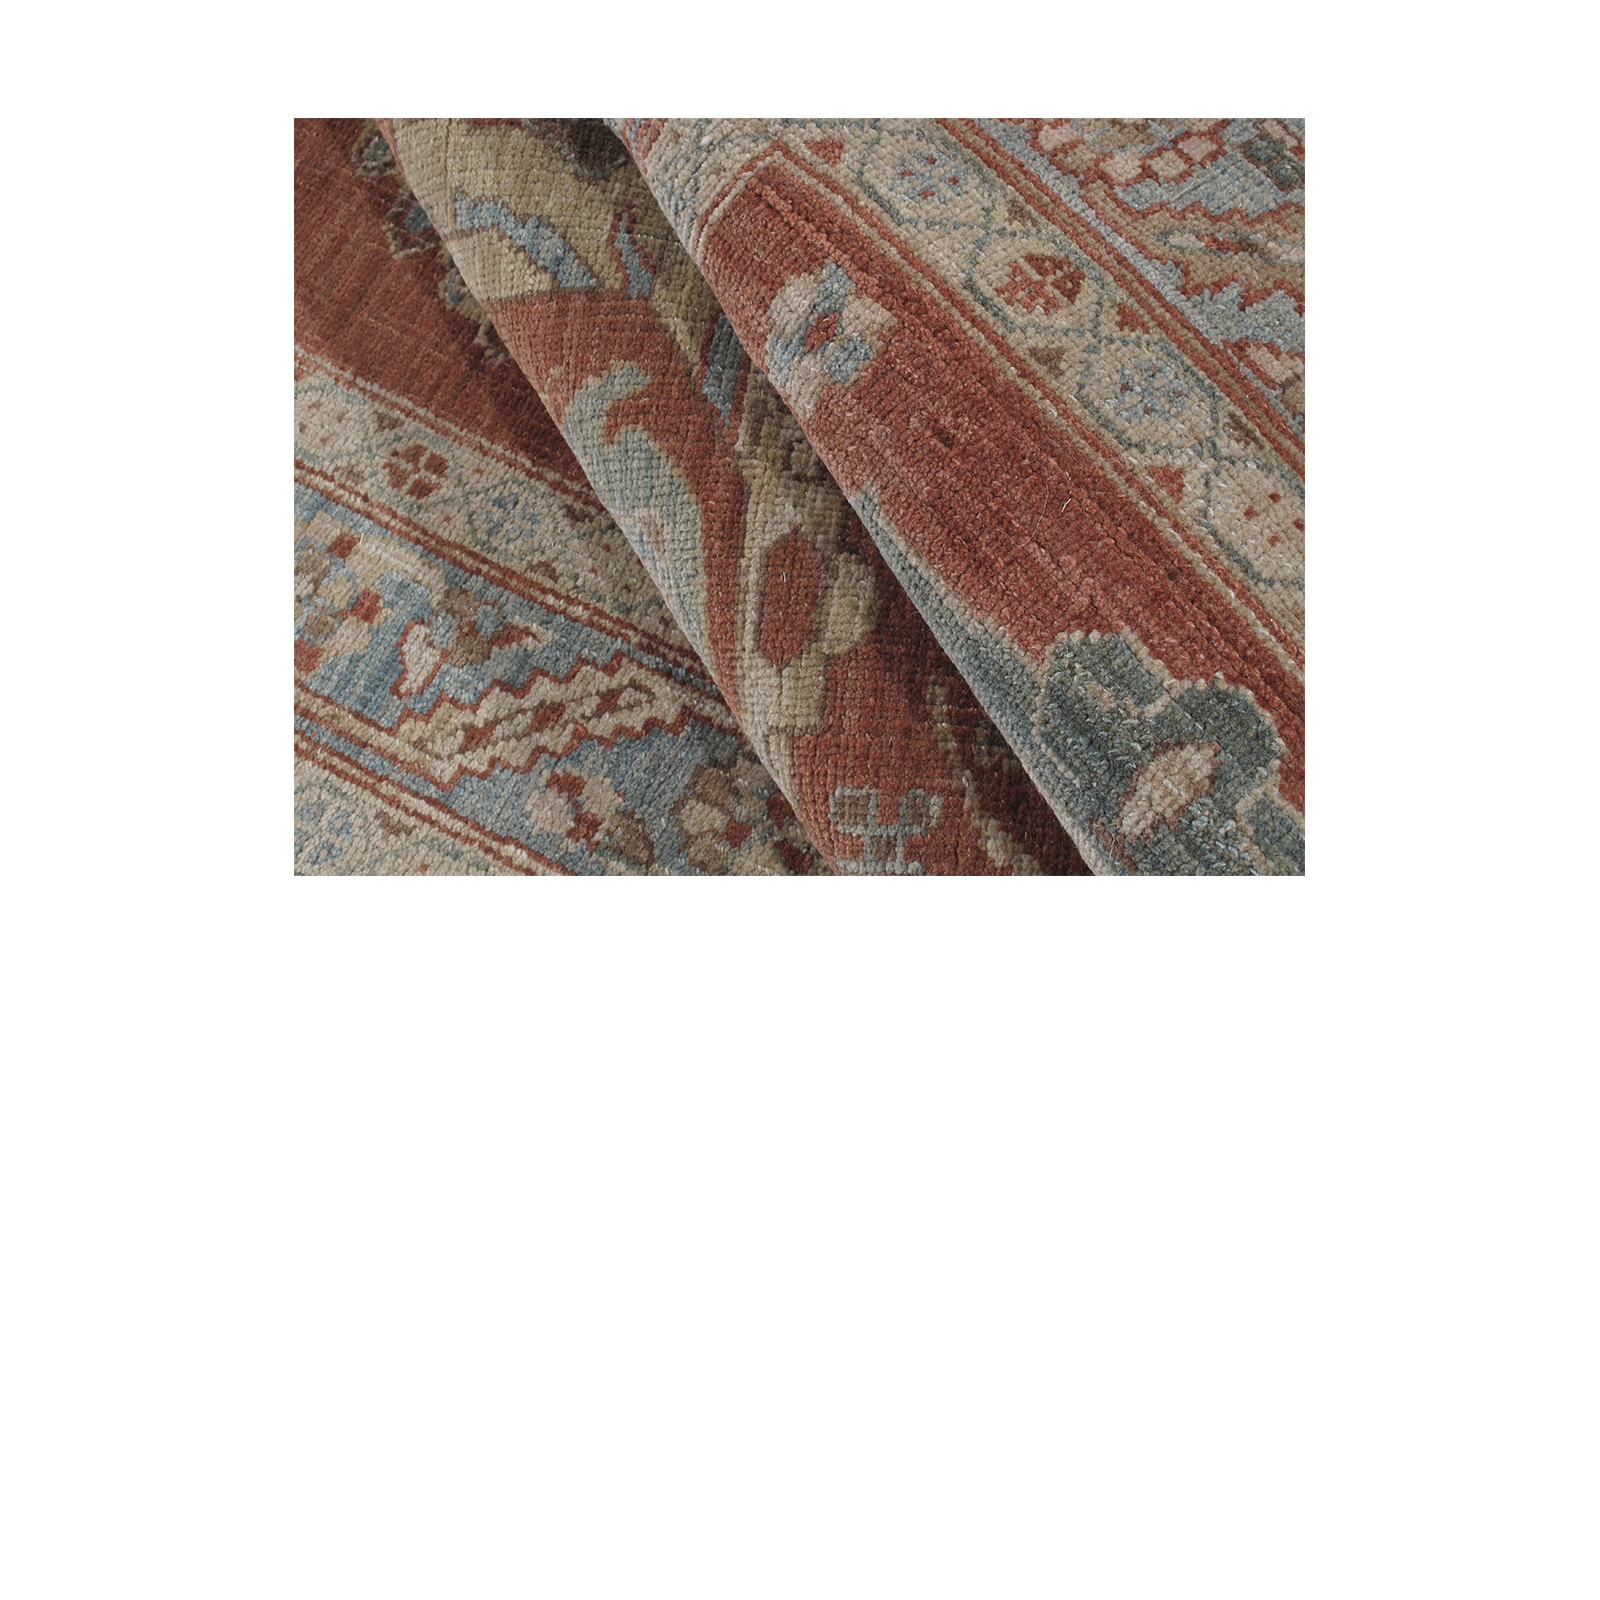 Bakshaish Runner is crafted using Persian wool and natural dye. 